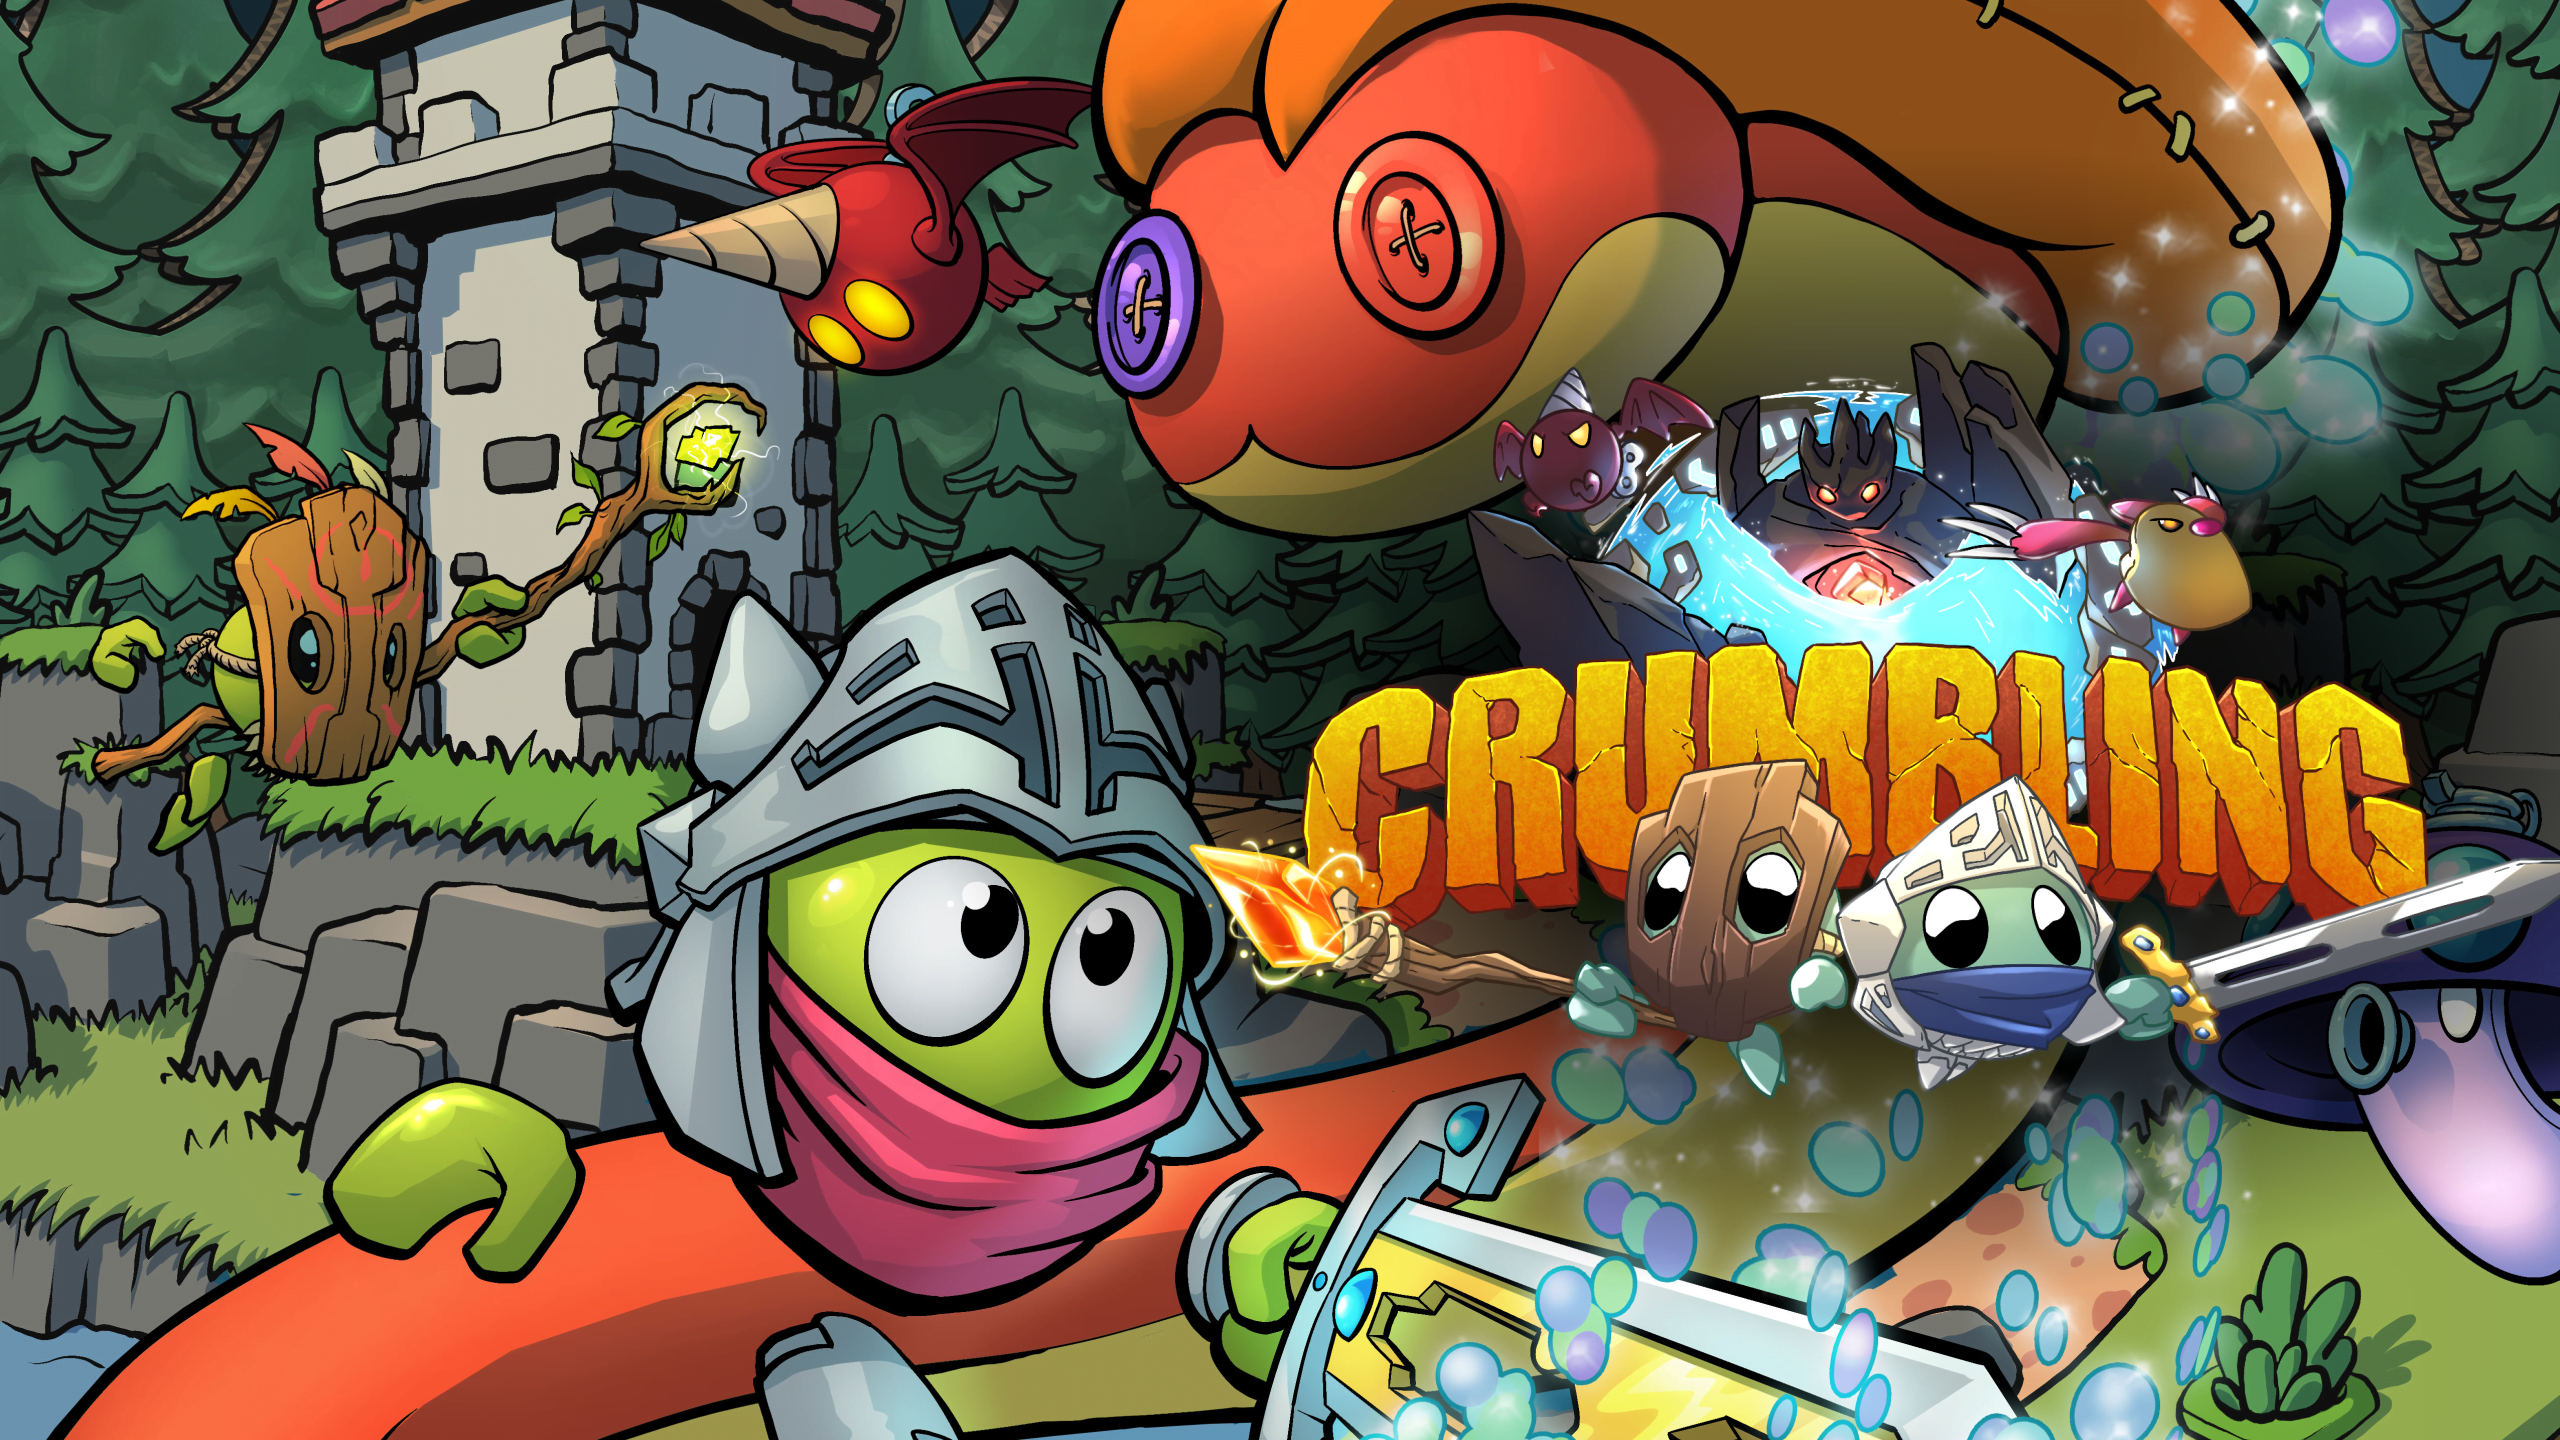 VR game "Crumbling" takes you back to childhood days